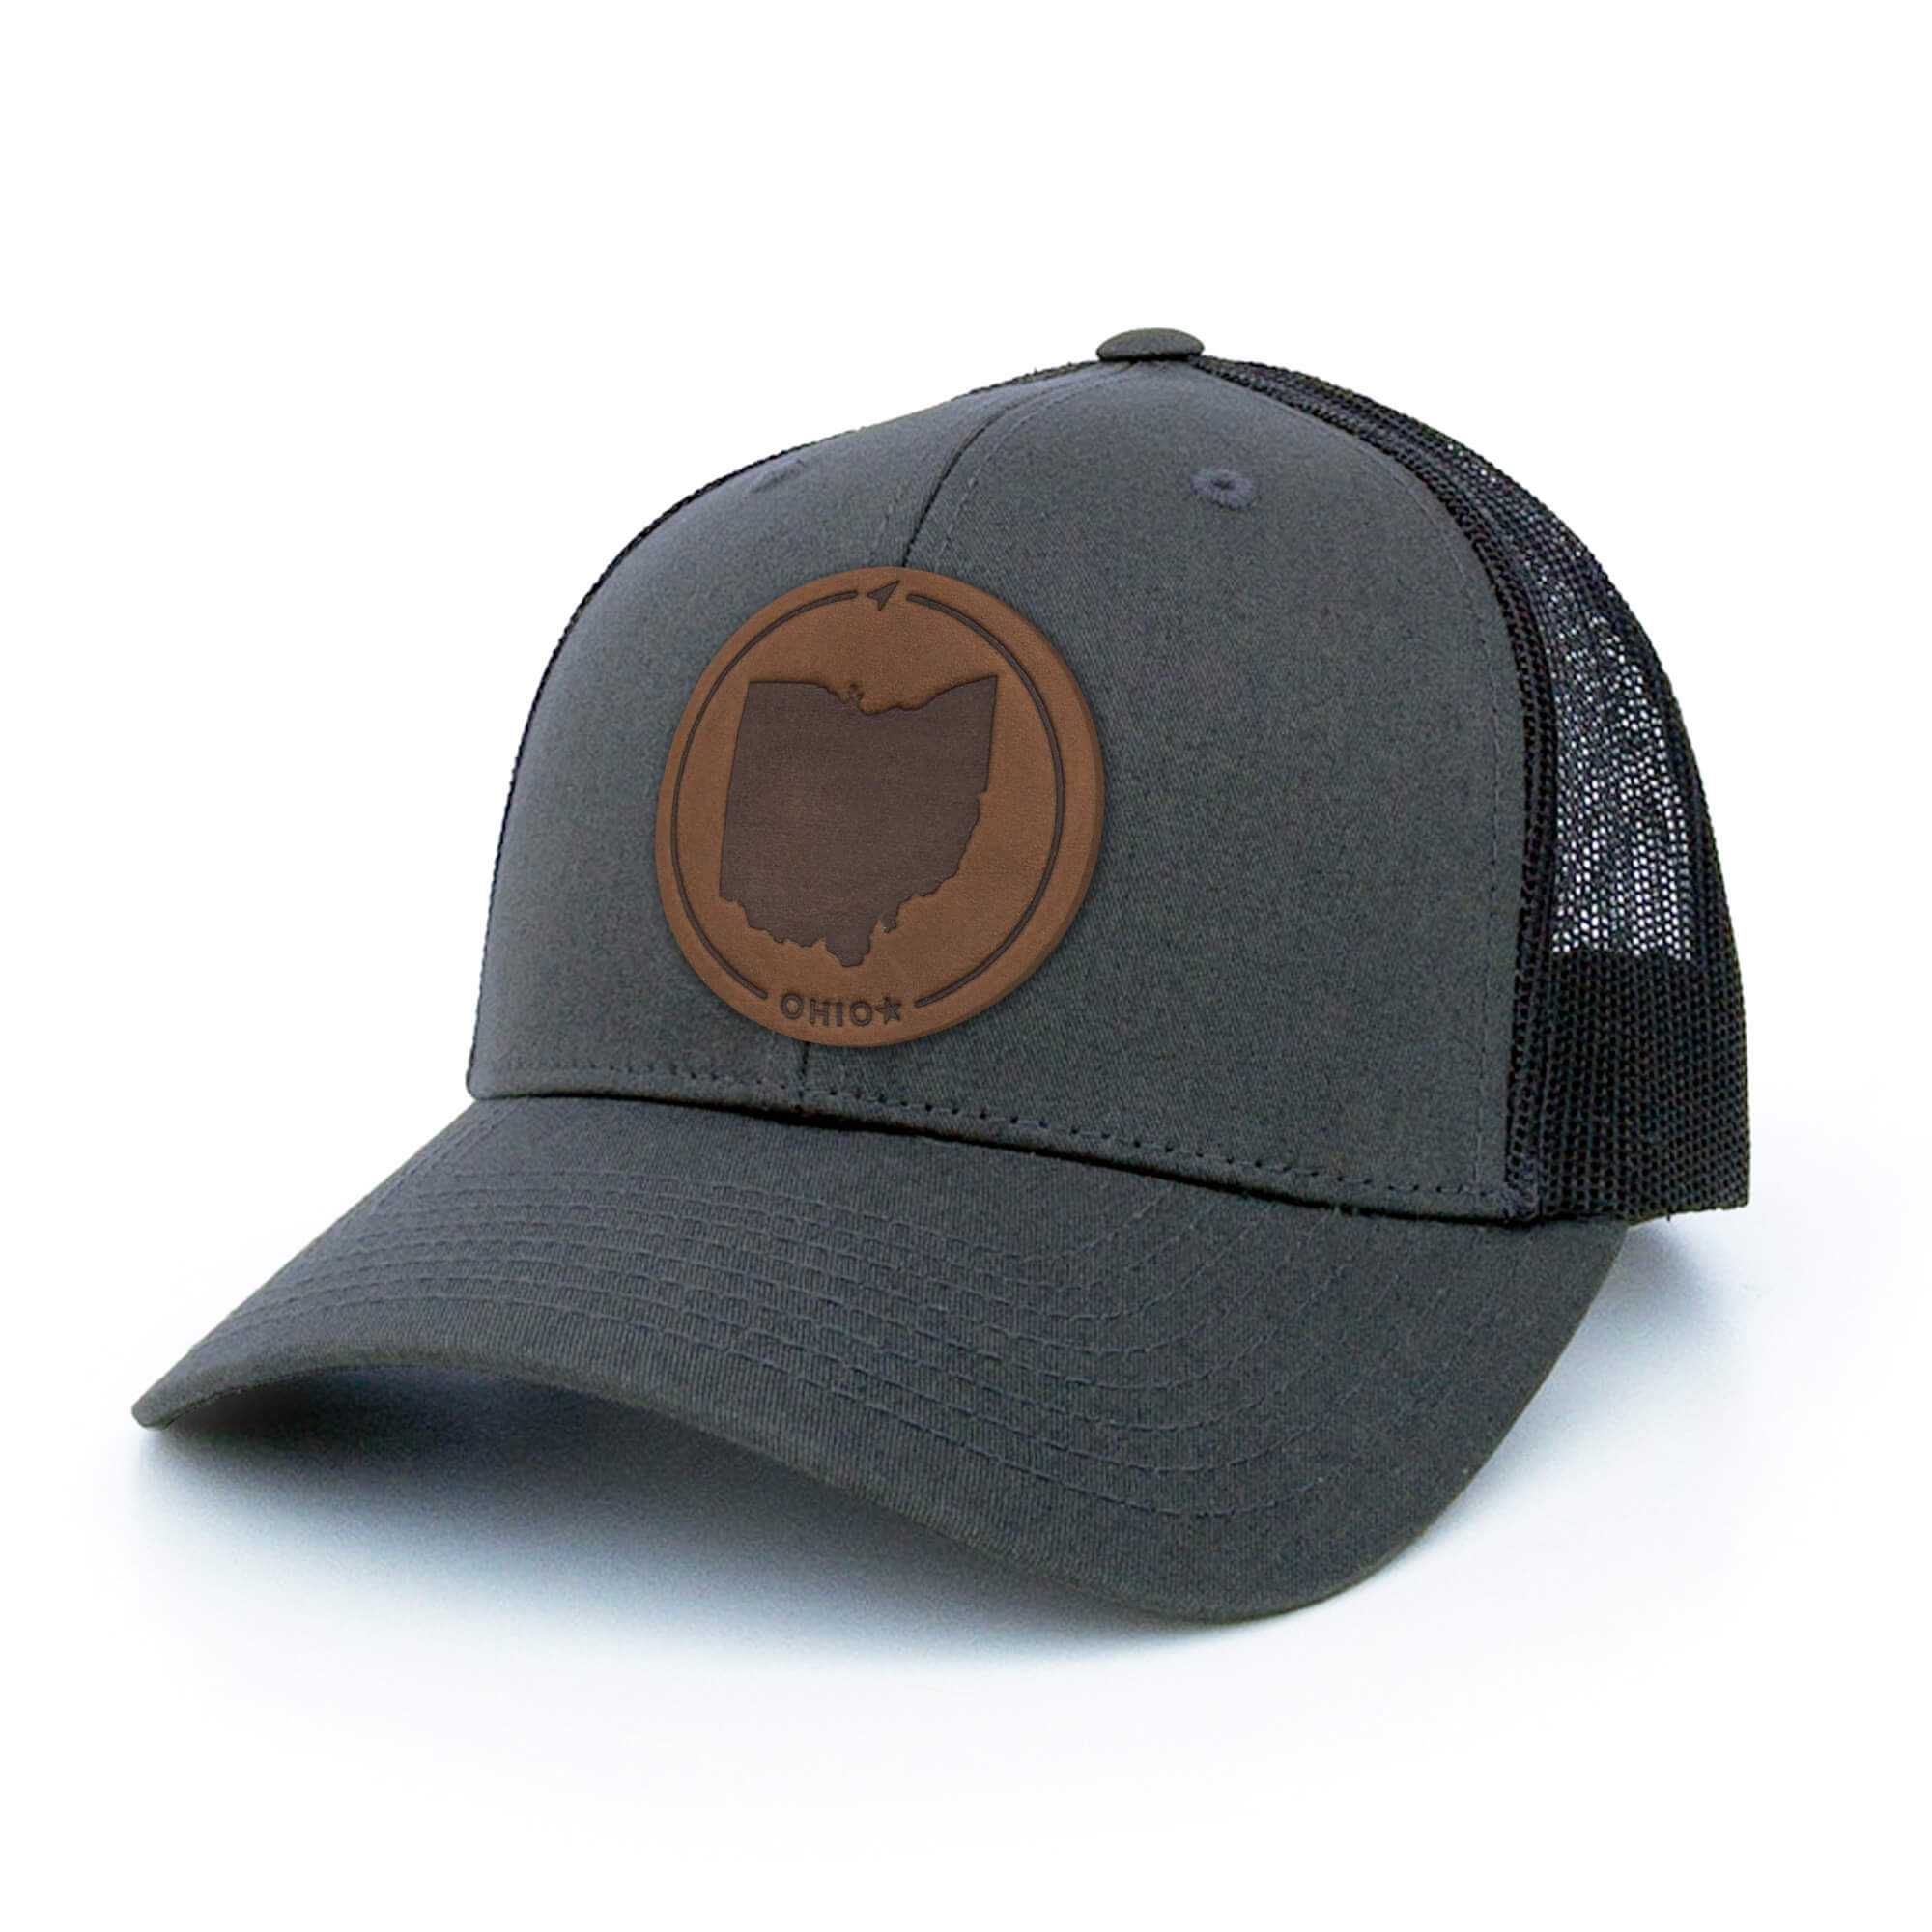 Charcoal trucker hat with full-grain leather patch of Ohio | BLACK-003-004, CHARC-003-004, NAVY-003-004, HGREY-003-004, MOSS-003-004, BROWN-003-004